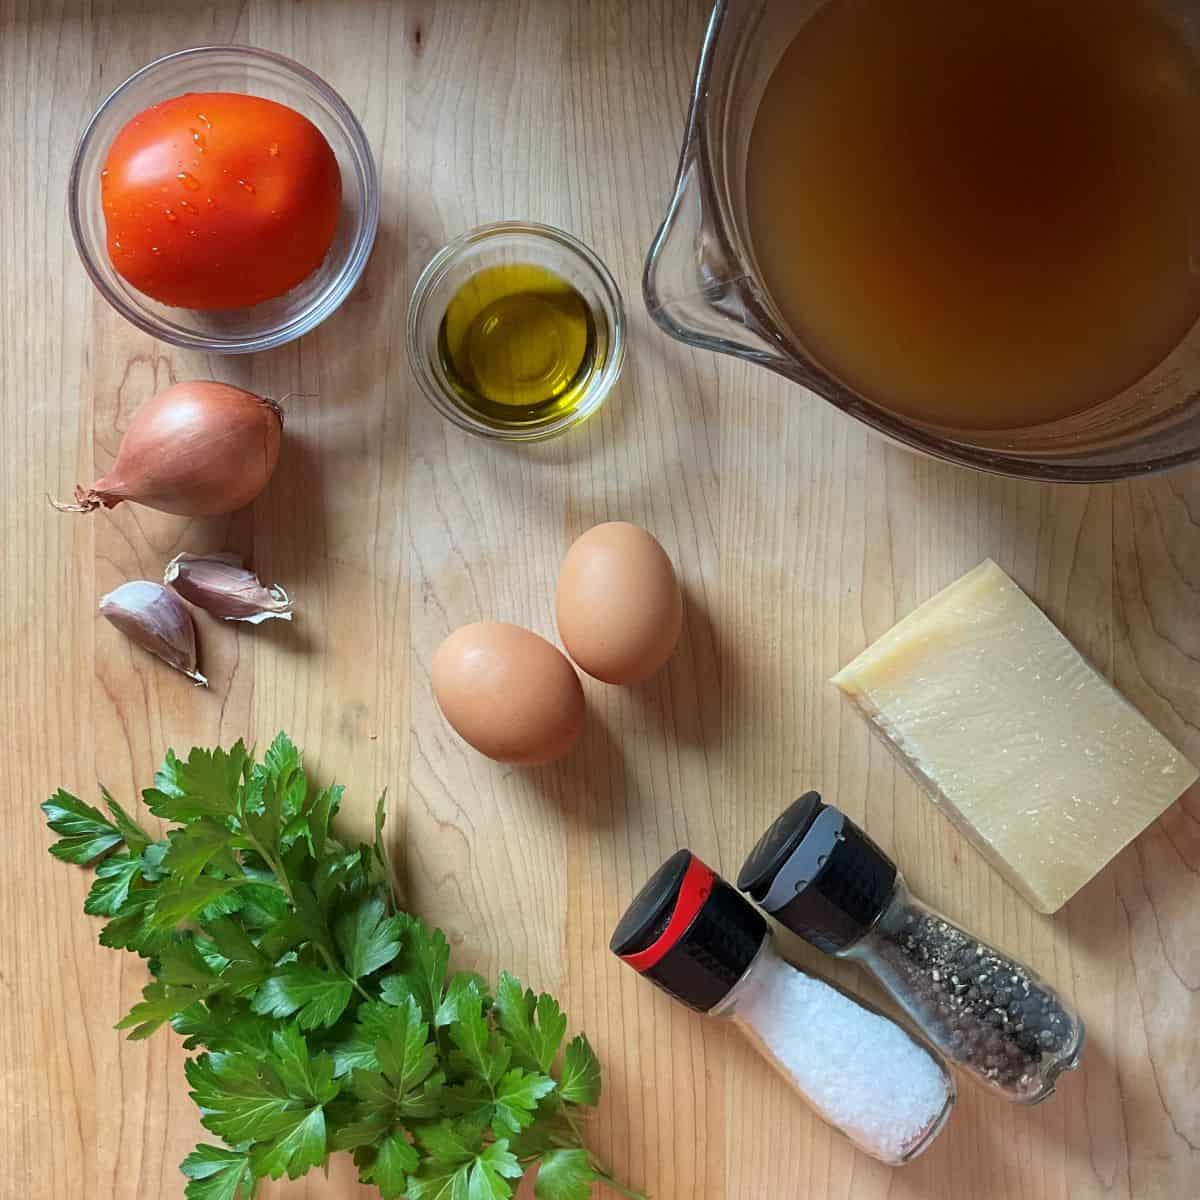 Ingredients to make Italian egg drop soup on a wooden board.